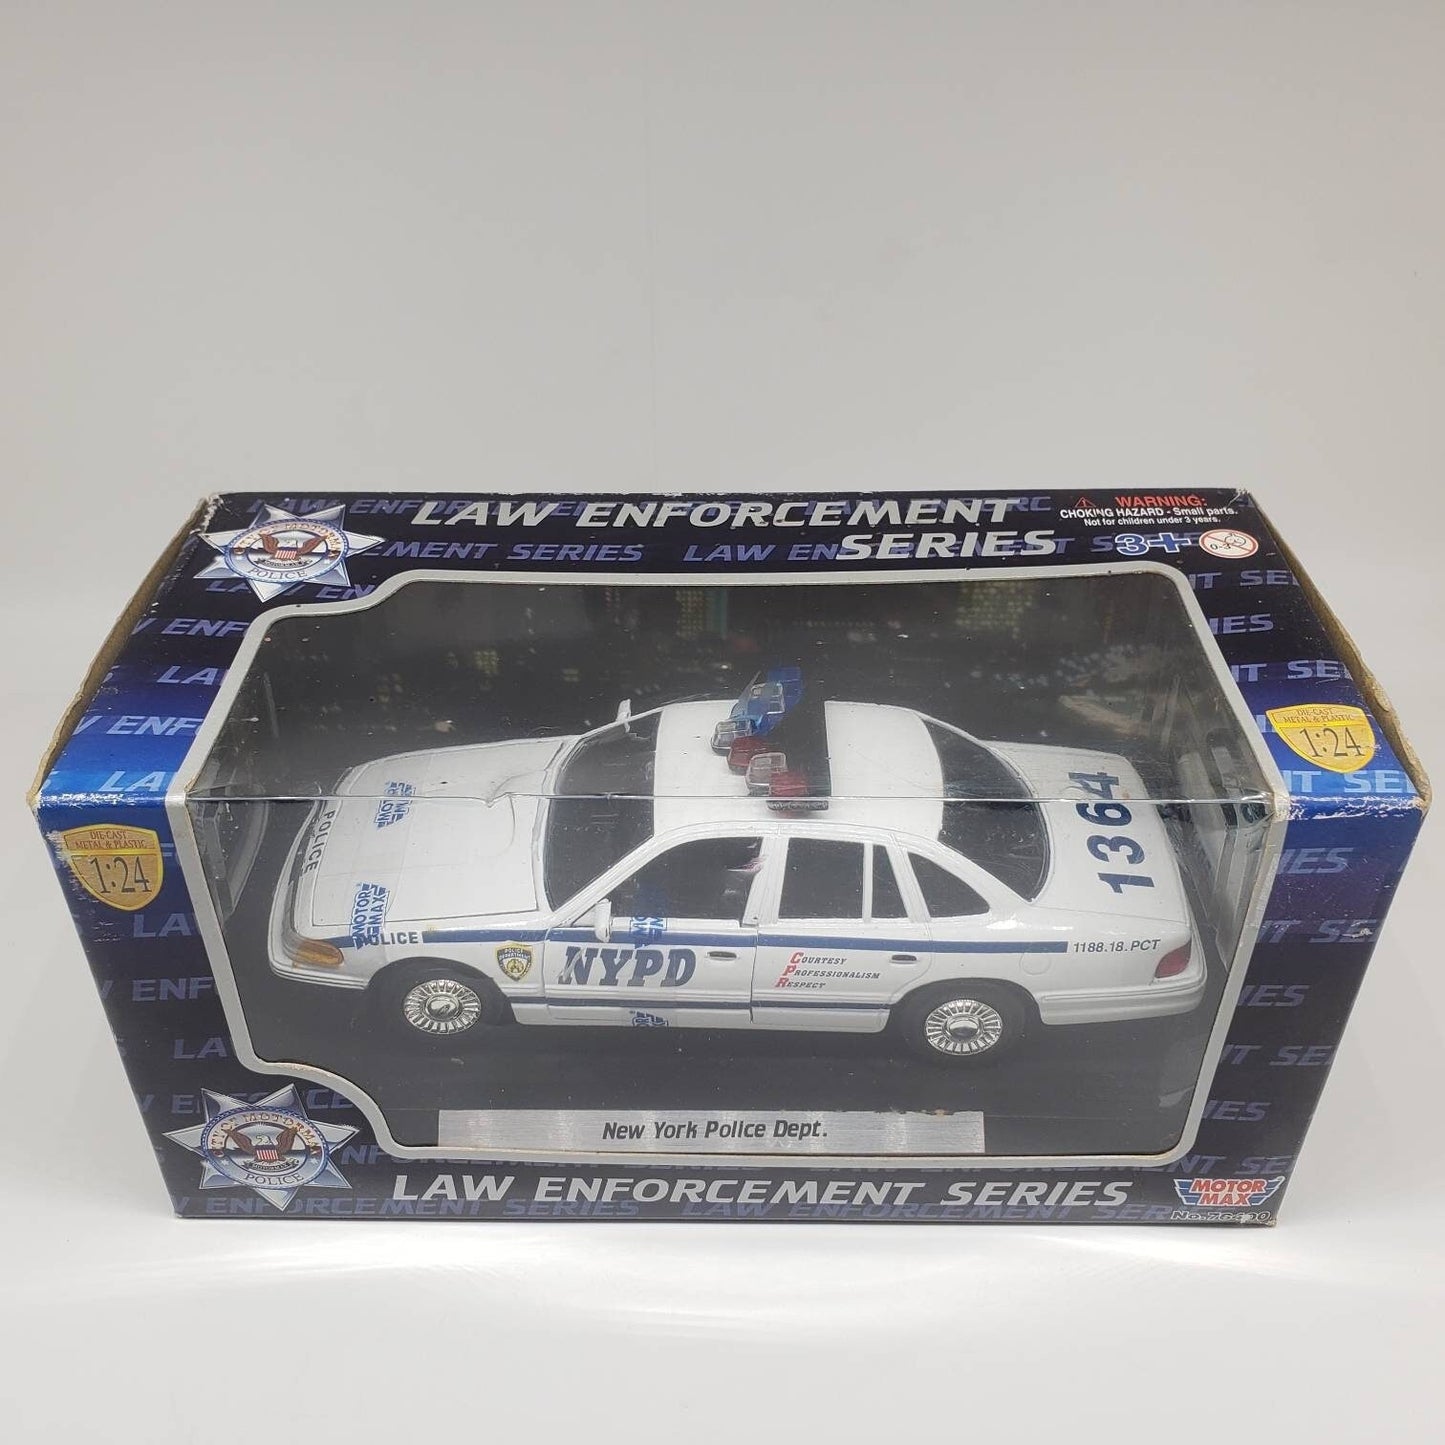 Motor Max NYPD Ford Crown Victoria White Collectable Scale Model Replica Police Toy Car Perfect Birthday Gift